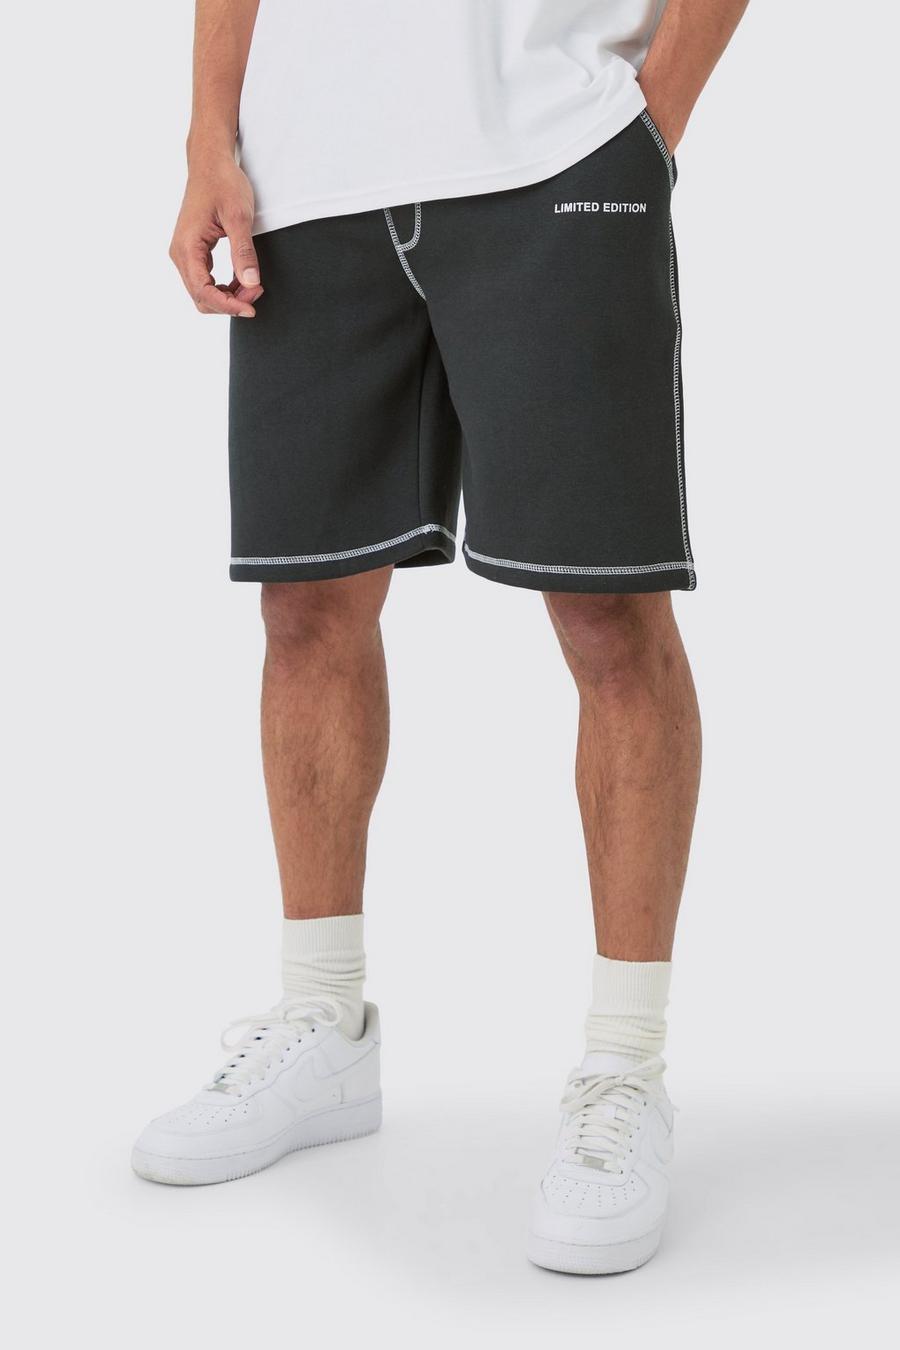 Black Baggy Limited Edition Shorts Met Contrasterende Stiksels